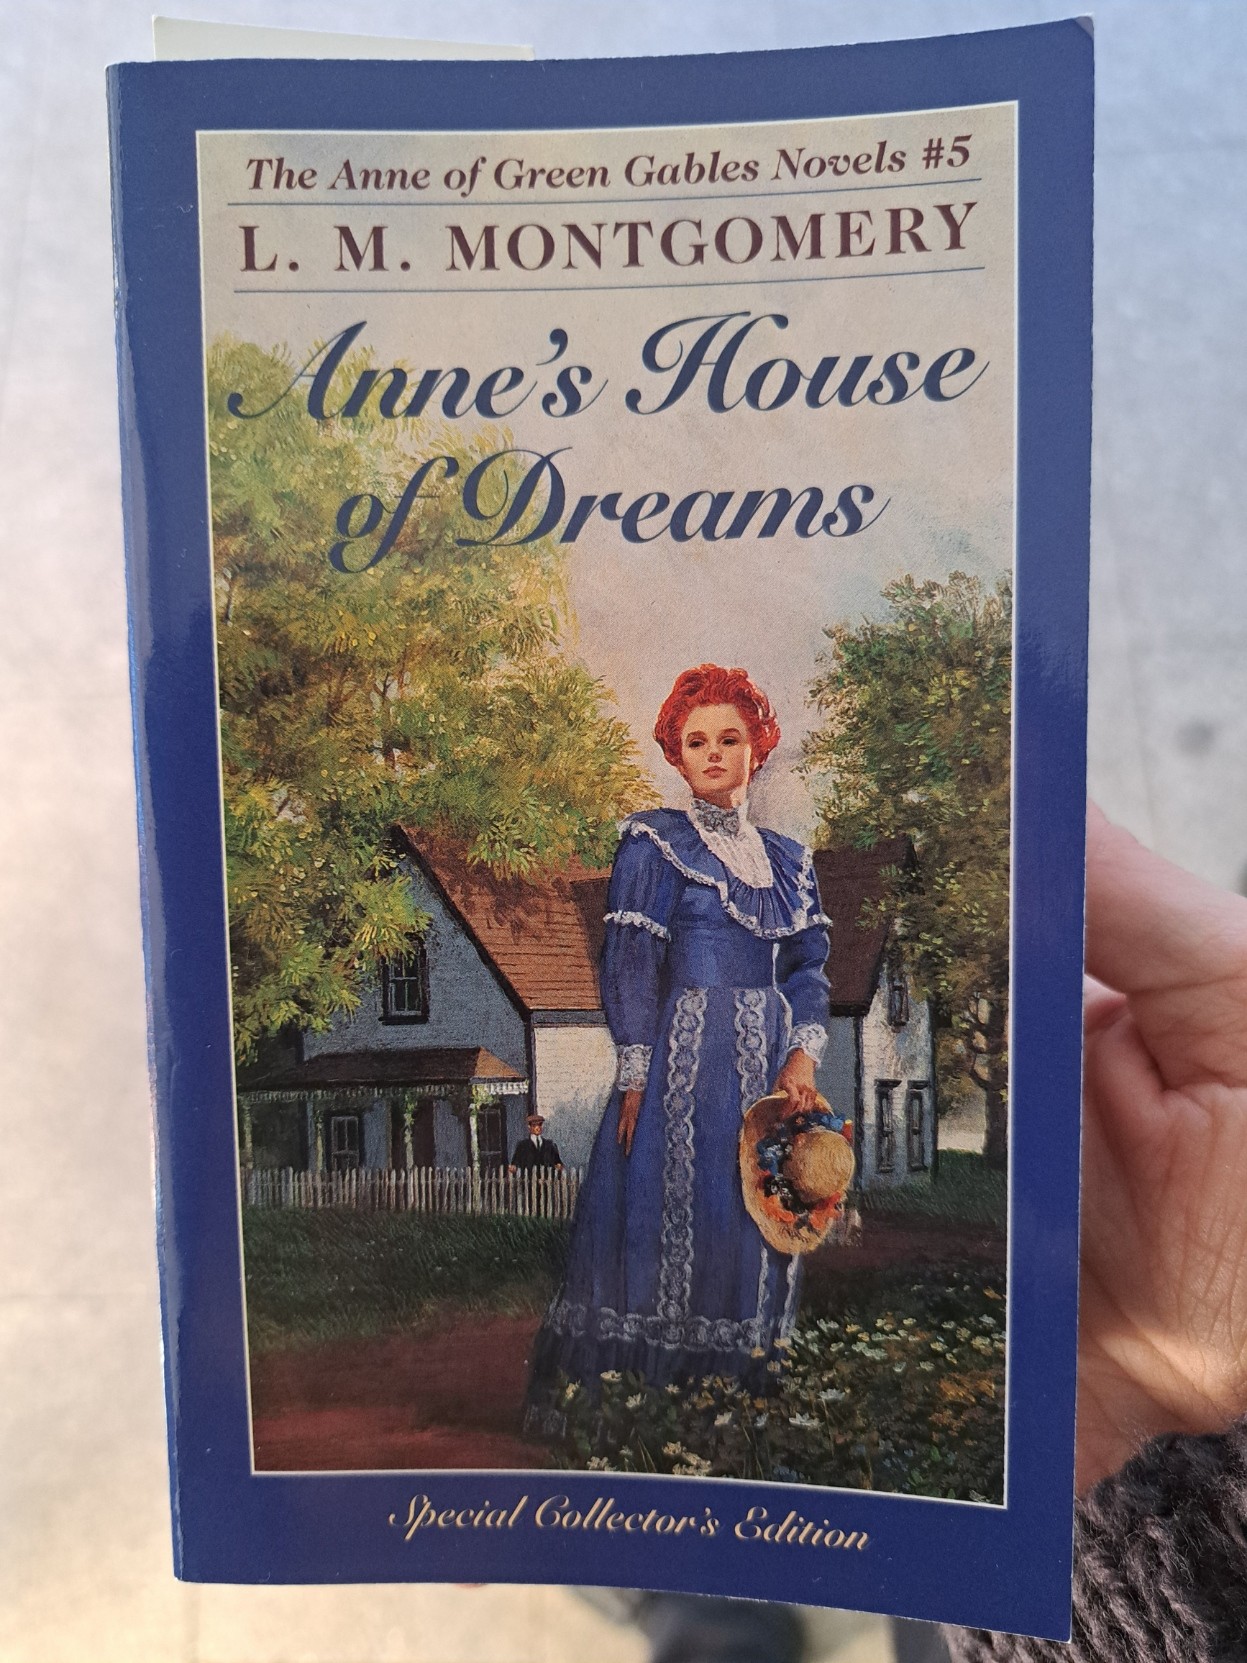 A picture of L. M. Montgomery's 